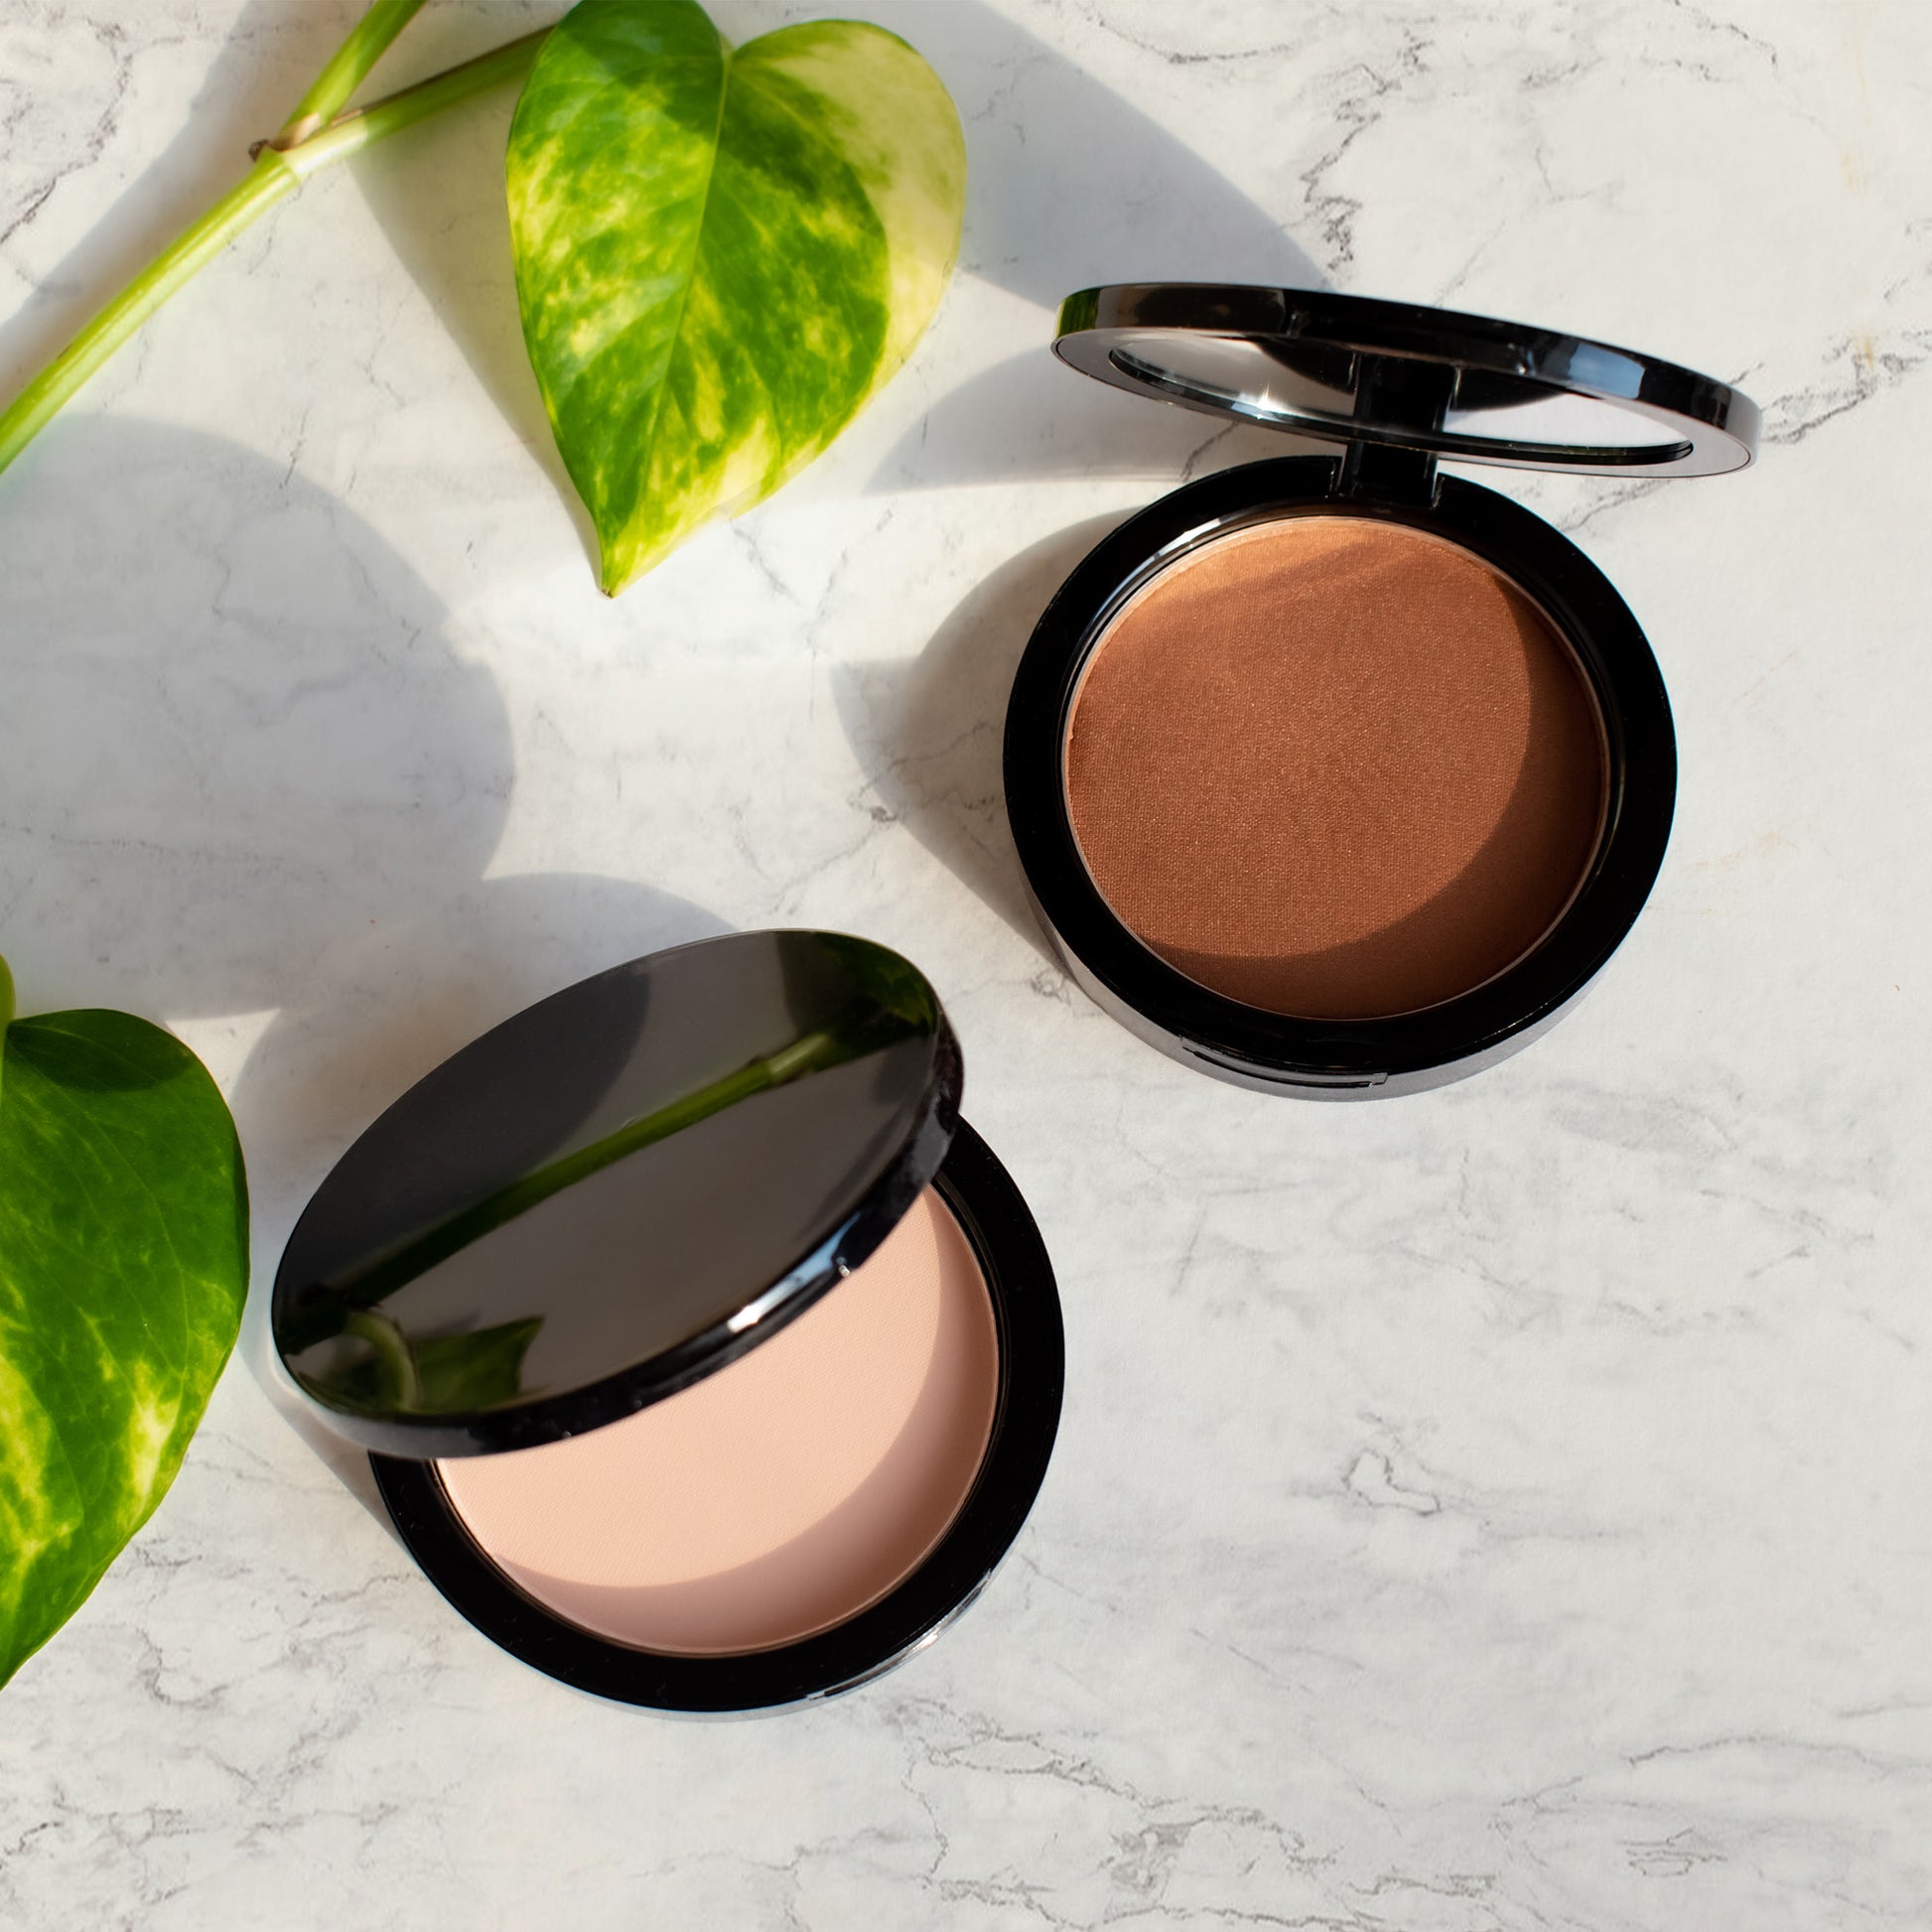 Formulated with high-quality inorganic ingredients, the Cruisin Organics Bisque Powder Foundation is suitable for all skin types, including sensitive skin. It is dermatologist-tested and free from harmful chemicals, ensuring a safe and gentle application.